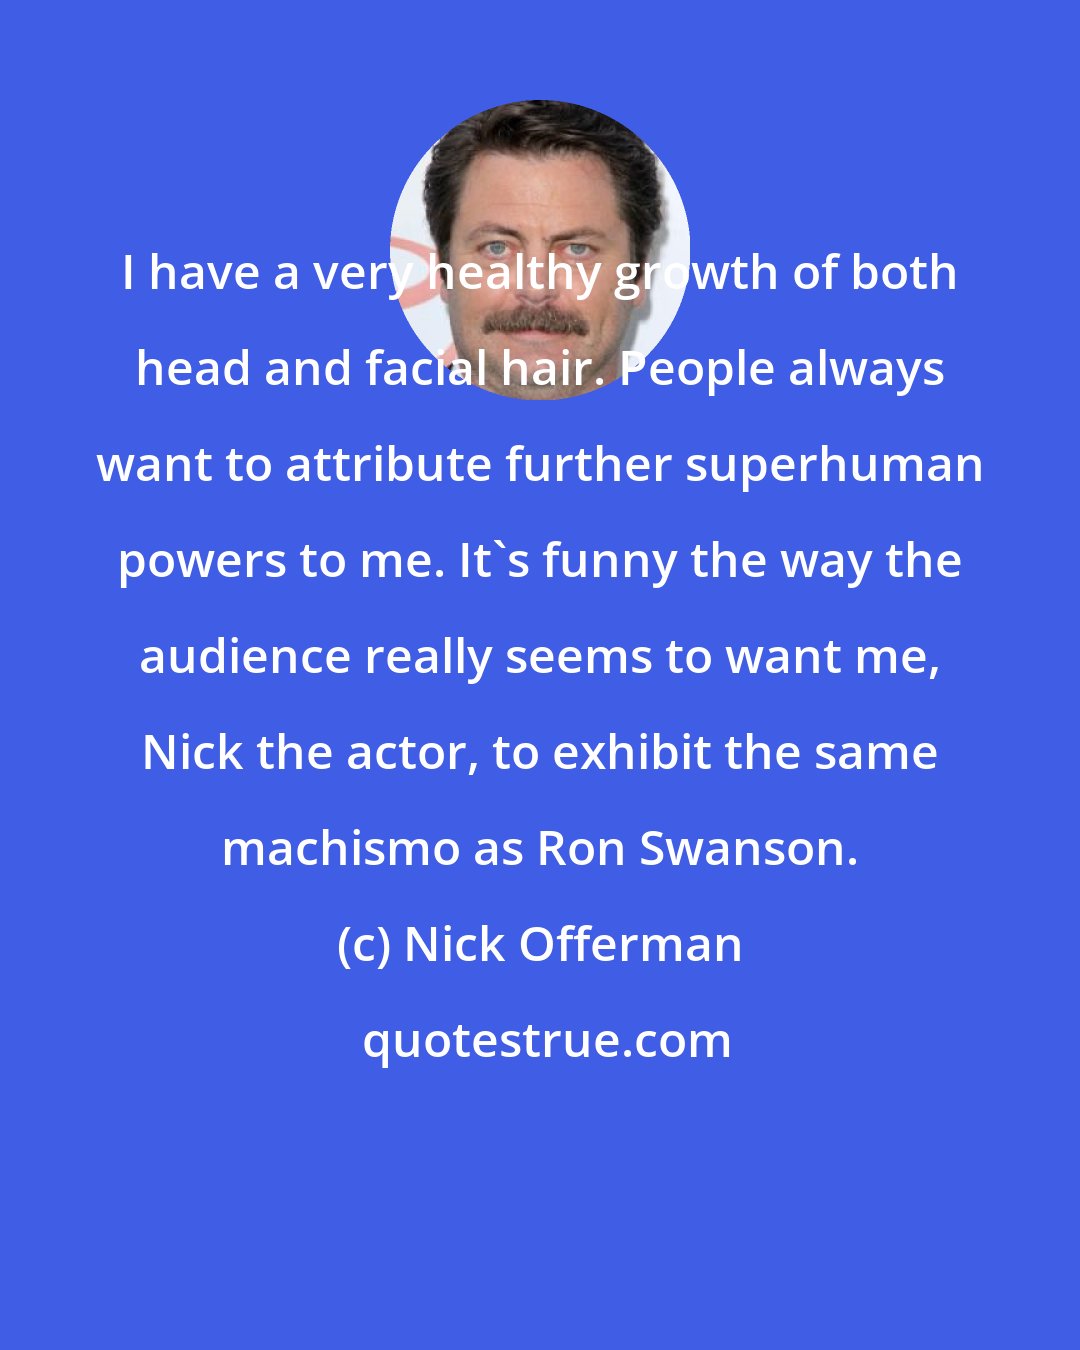 Nick Offerman: I have a very healthy growth of both head and facial hair. People always want to attribute further superhuman powers to me. It's funny the way the audience really seems to want me, Nick the actor, to exhibit the same machismo as Ron Swanson.